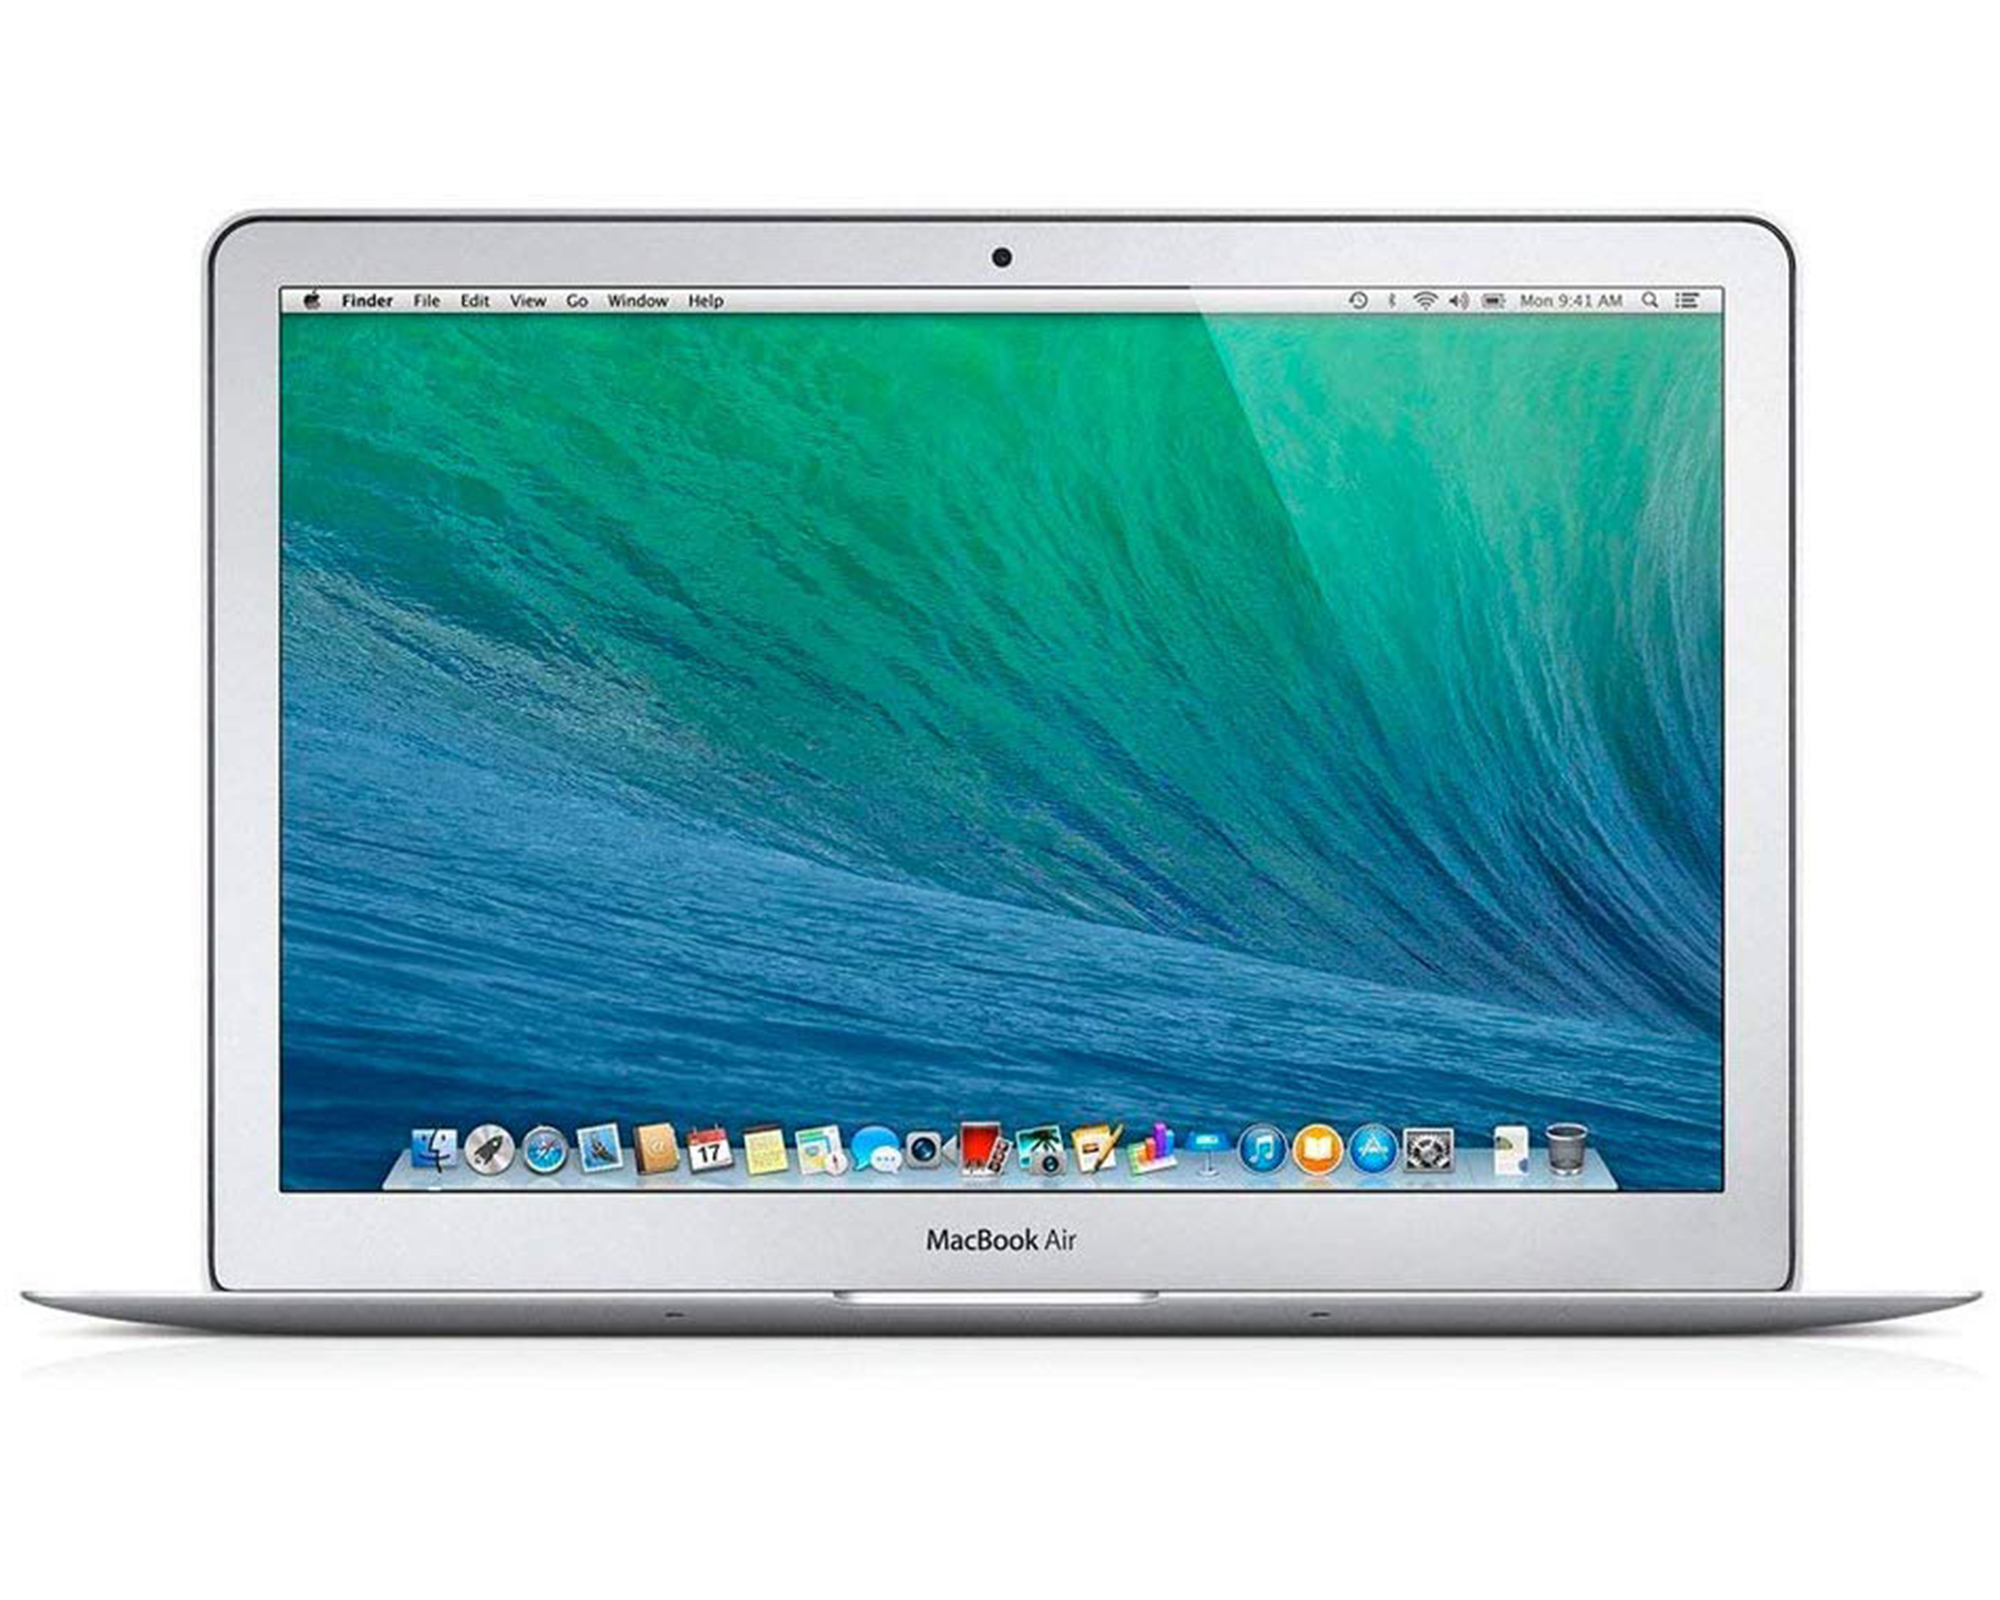 Restored | Apple MacBook Air | 11.6-inch | Intel Core i5 | 4GB RAM 128GB SSD | MacOS | Bundle: USA Essentials Bluetooth/Wireless Airbuds, Black Case, Wireless Mouse By Certified 2 Day Express - image 4 of 9